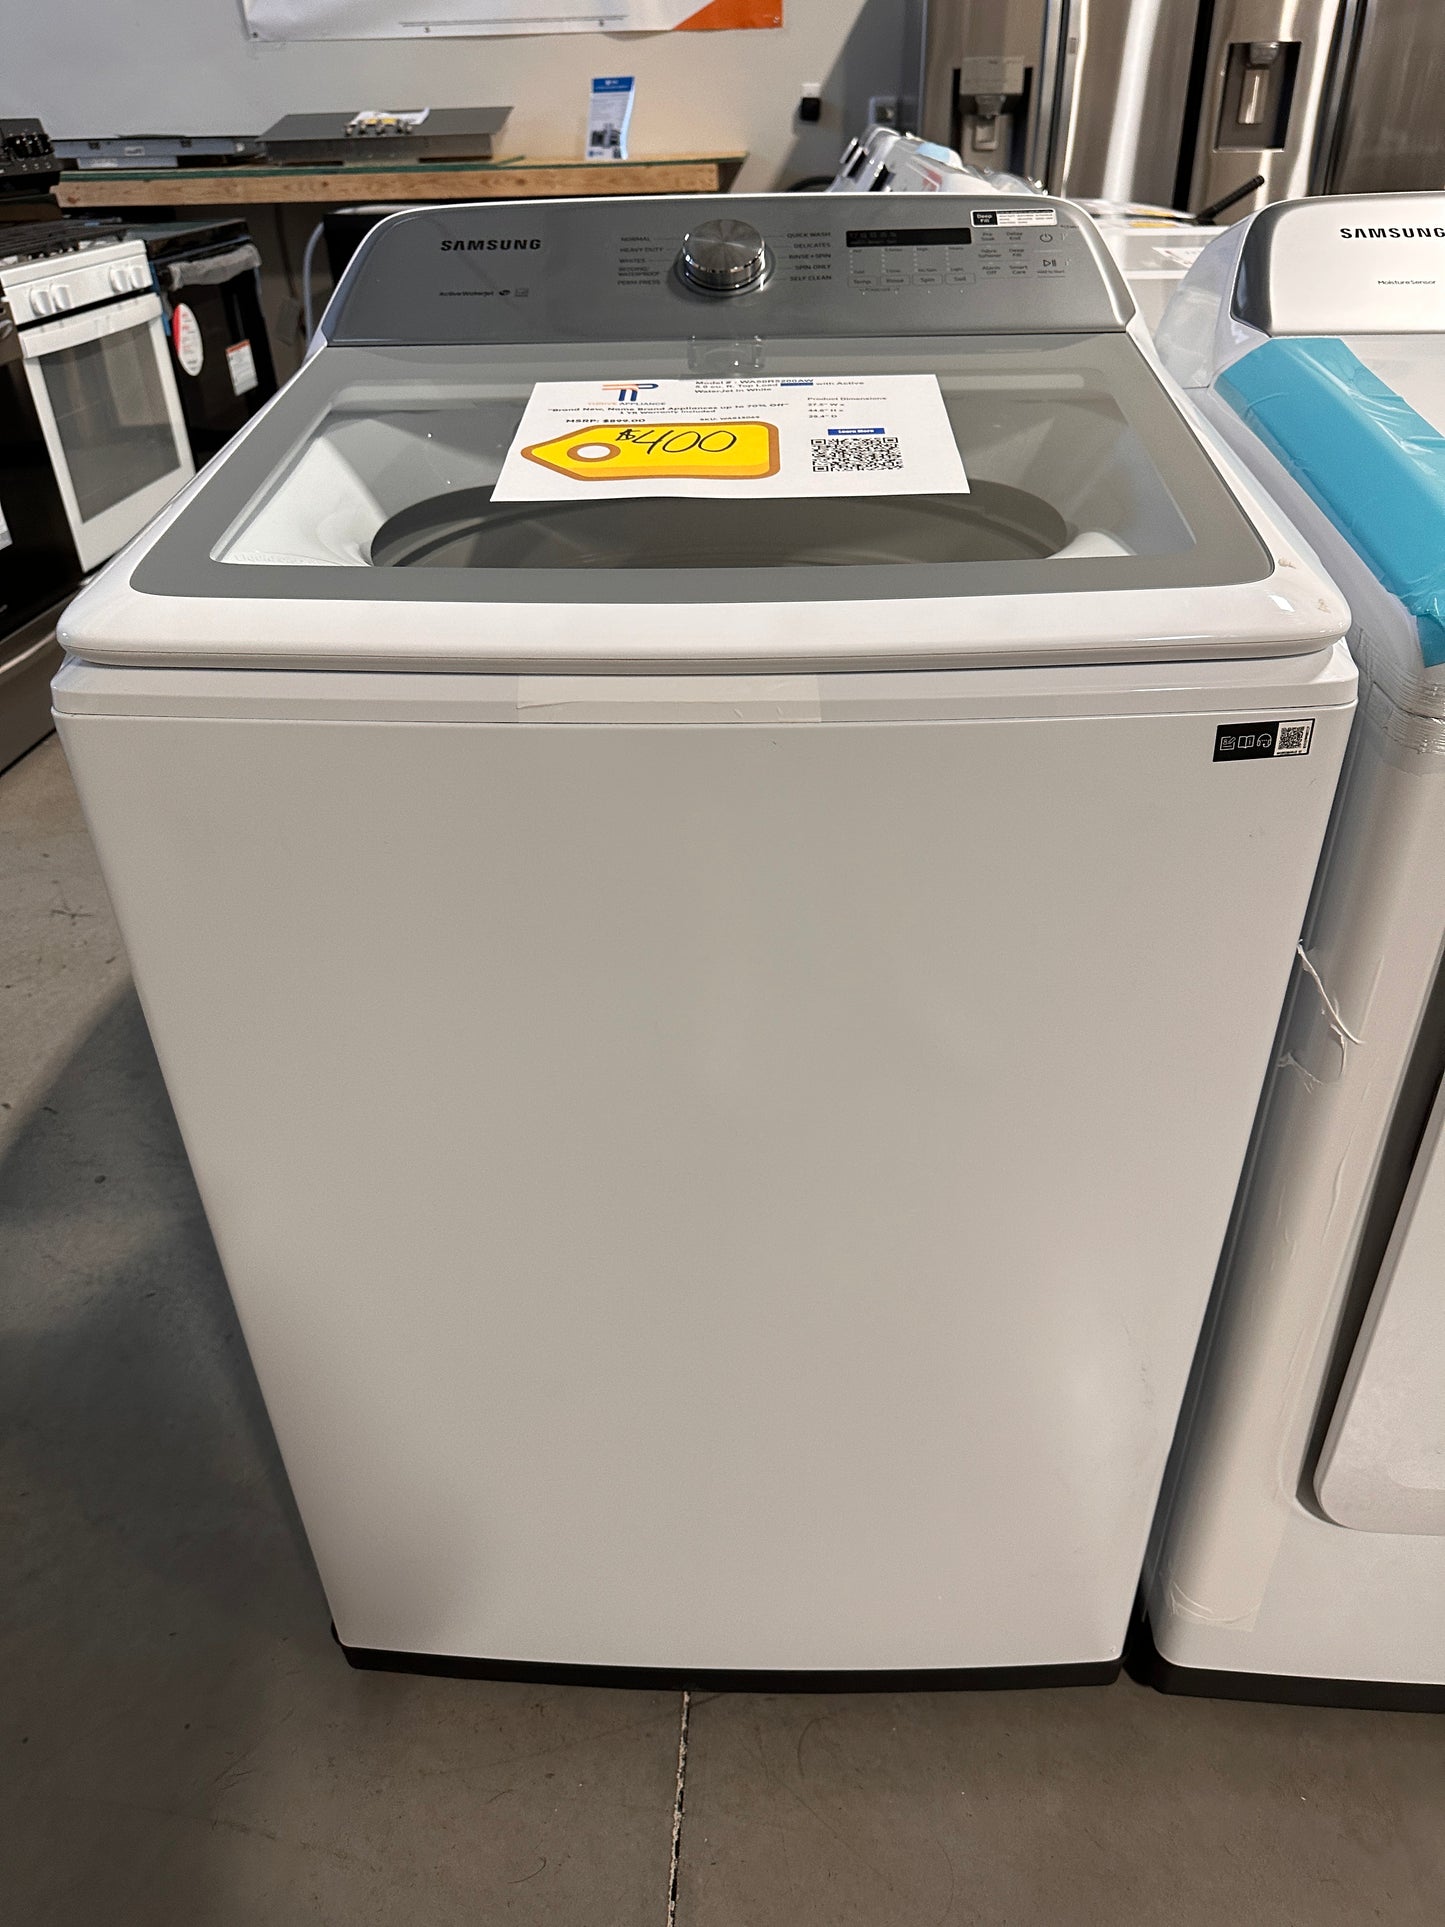 HIGH EFFICIENCY SAMSUNG TOP LOAD WASHER Model:WA50R5200AW/US  WAS13069